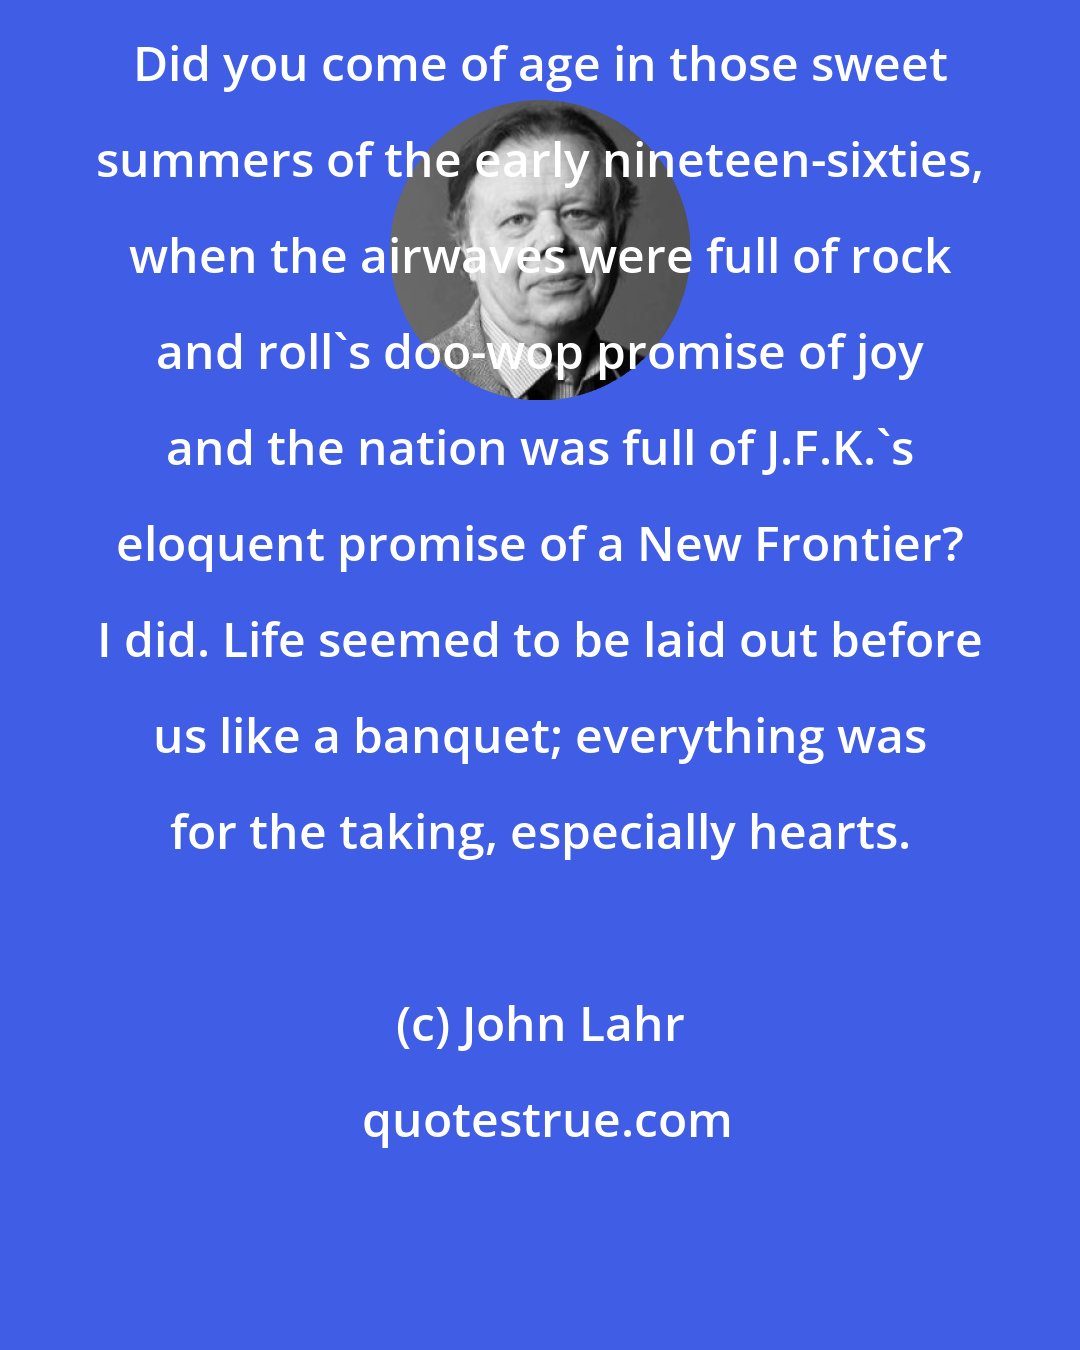 John Lahr: Did you come of age in those sweet summers of the early nineteen-sixties, when the airwaves were full of rock and roll's doo-wop promise of joy and the nation was full of J.F.K.'s eloquent promise of a New Frontier? I did. Life seemed to be laid out before us like a banquet; everything was for the taking, especially hearts.